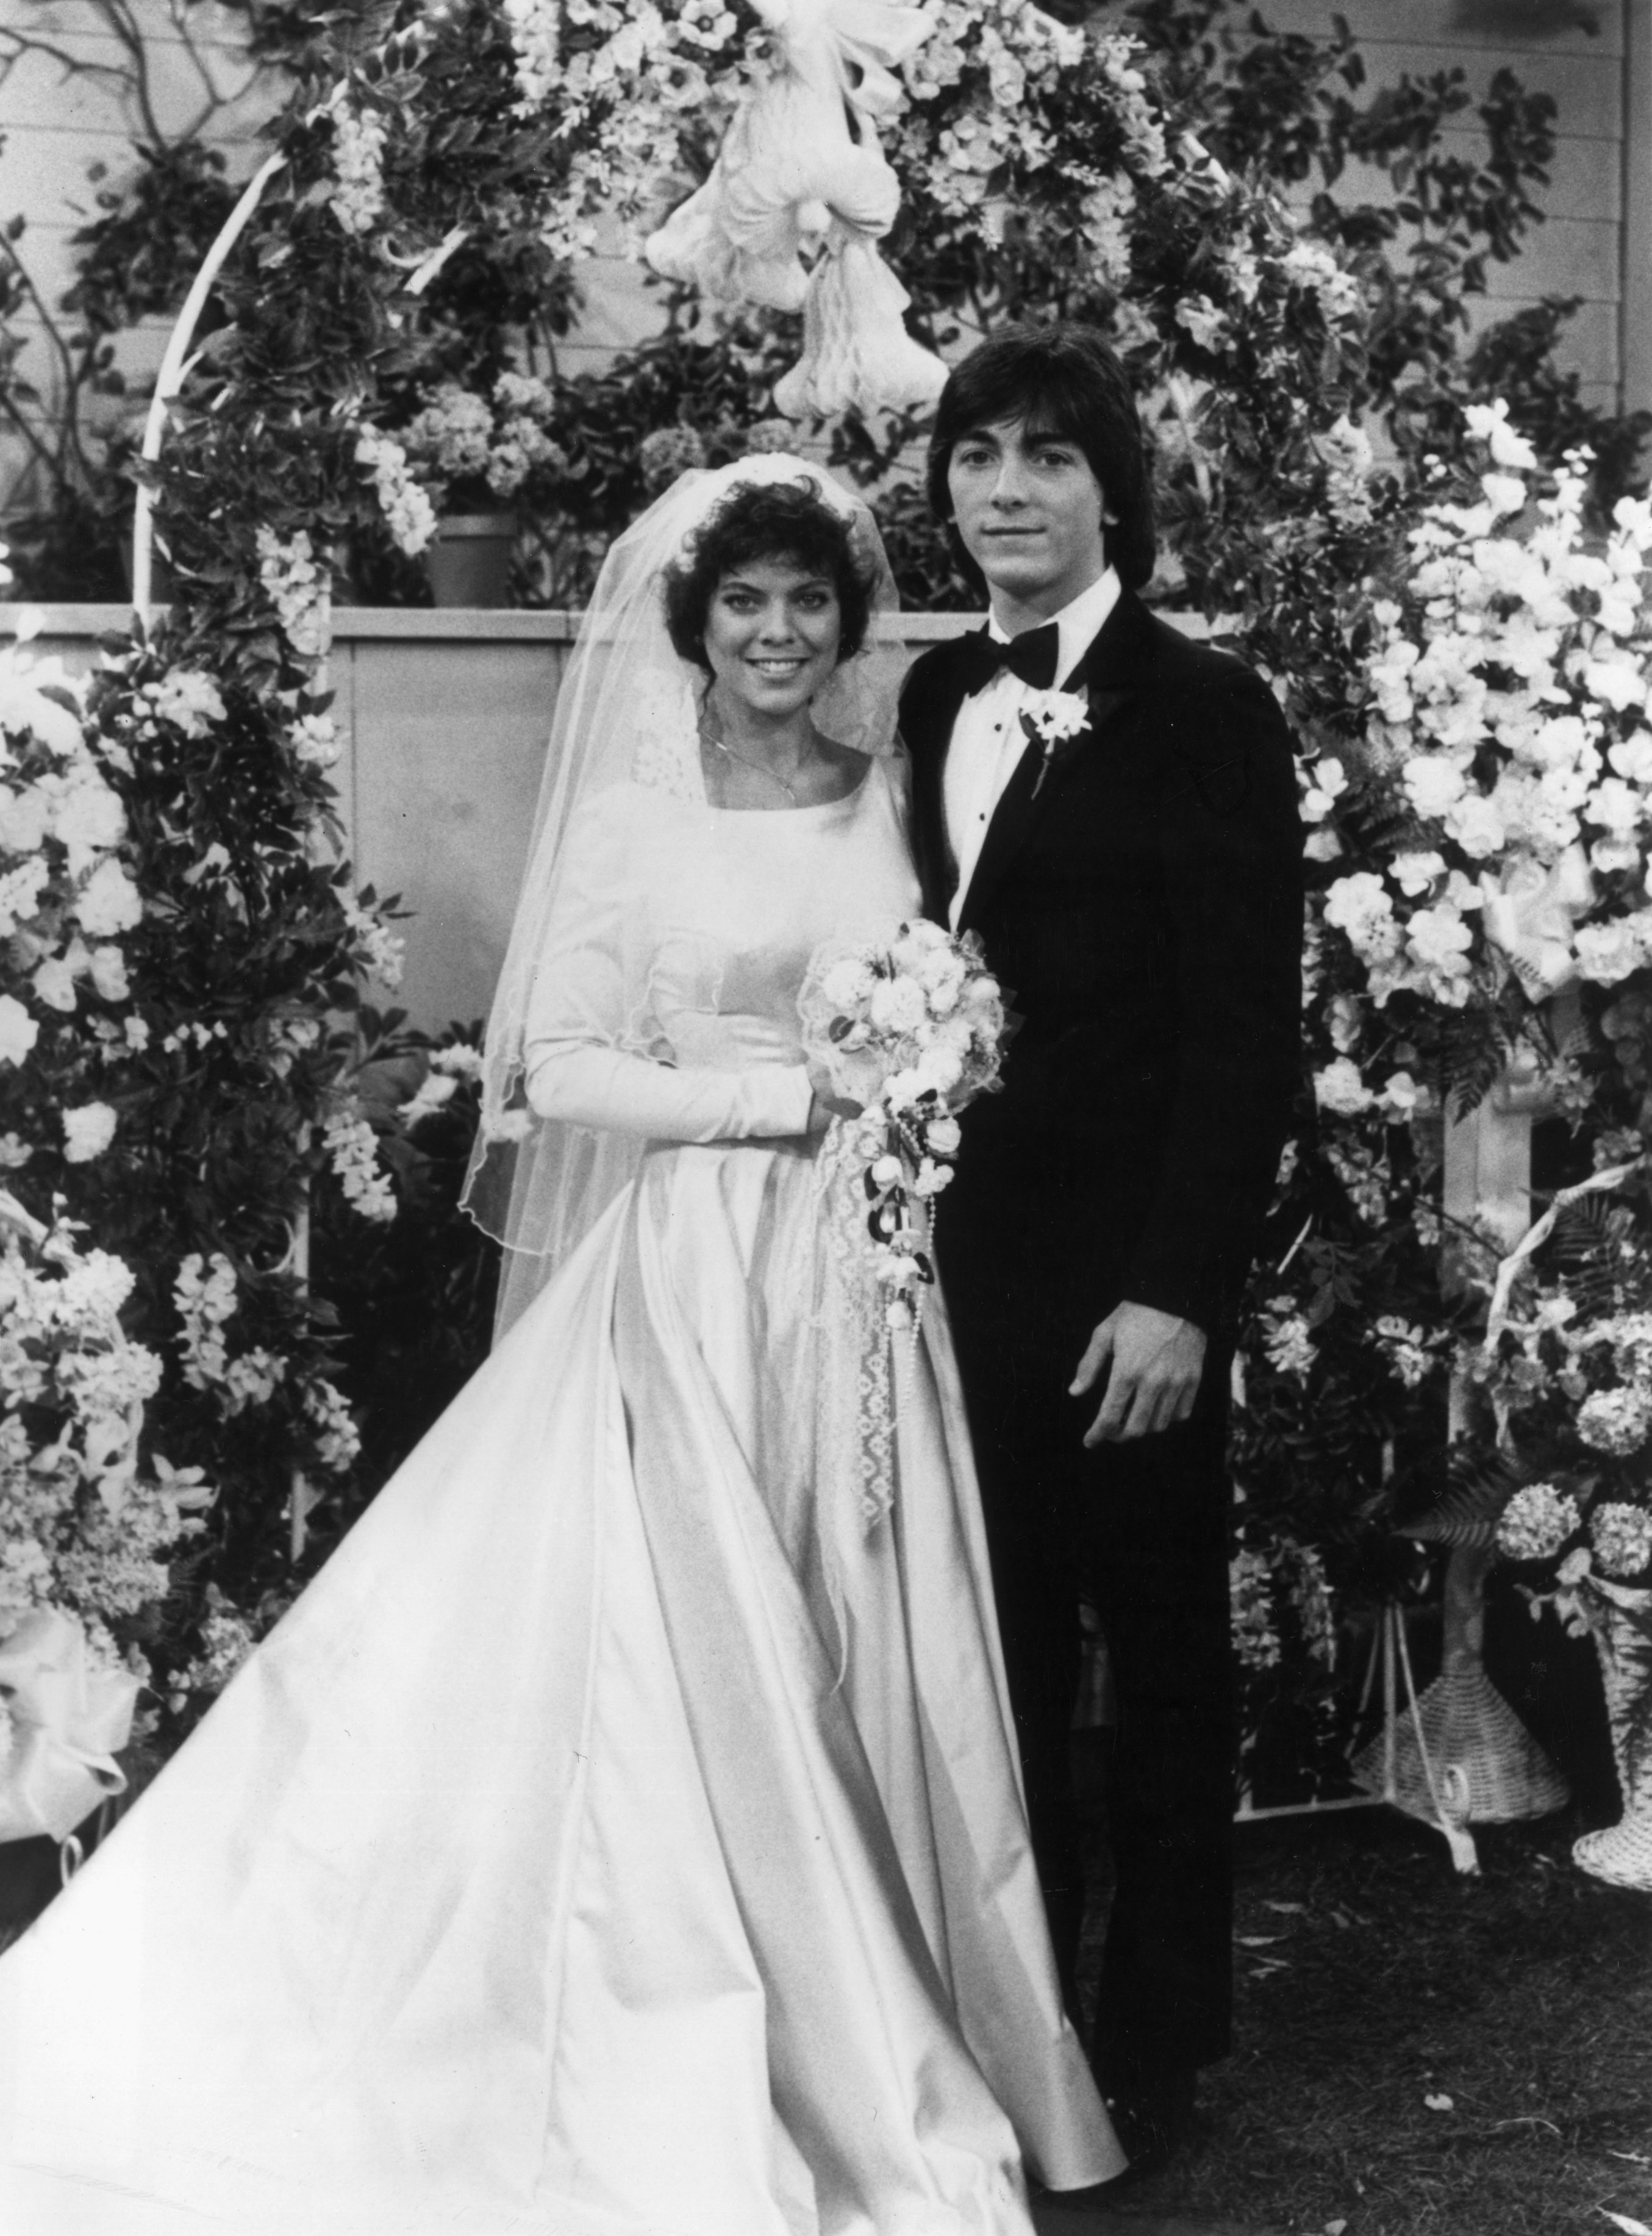 Erin Moran, wearing a wedding dress, and Scott Baio, wearing a tuxedo, posing at an altar in a promotional portrait for "Happy Days.'" / Source: Getty Images